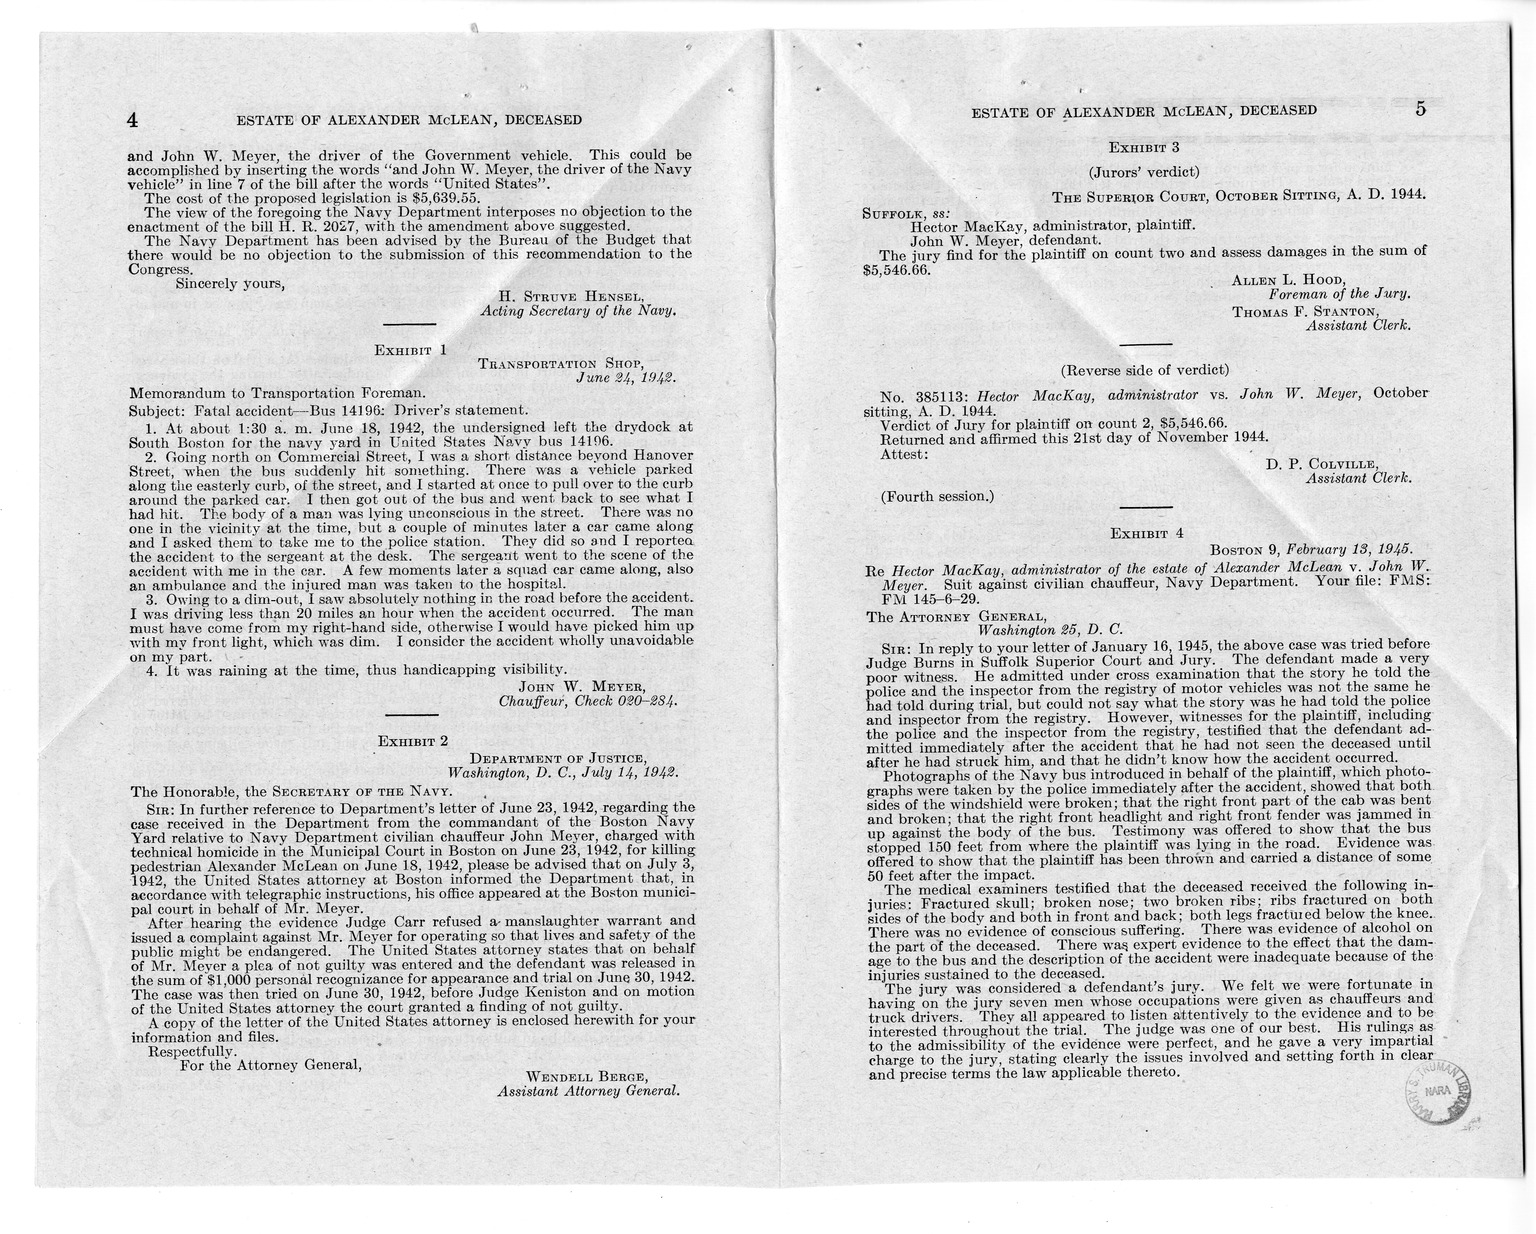 Memorandum from Frederick J. Bailey to M. C. Latta, H.R. 2027, For the Relief of the Estate of Alexander McLean, Deceased, with Attachments